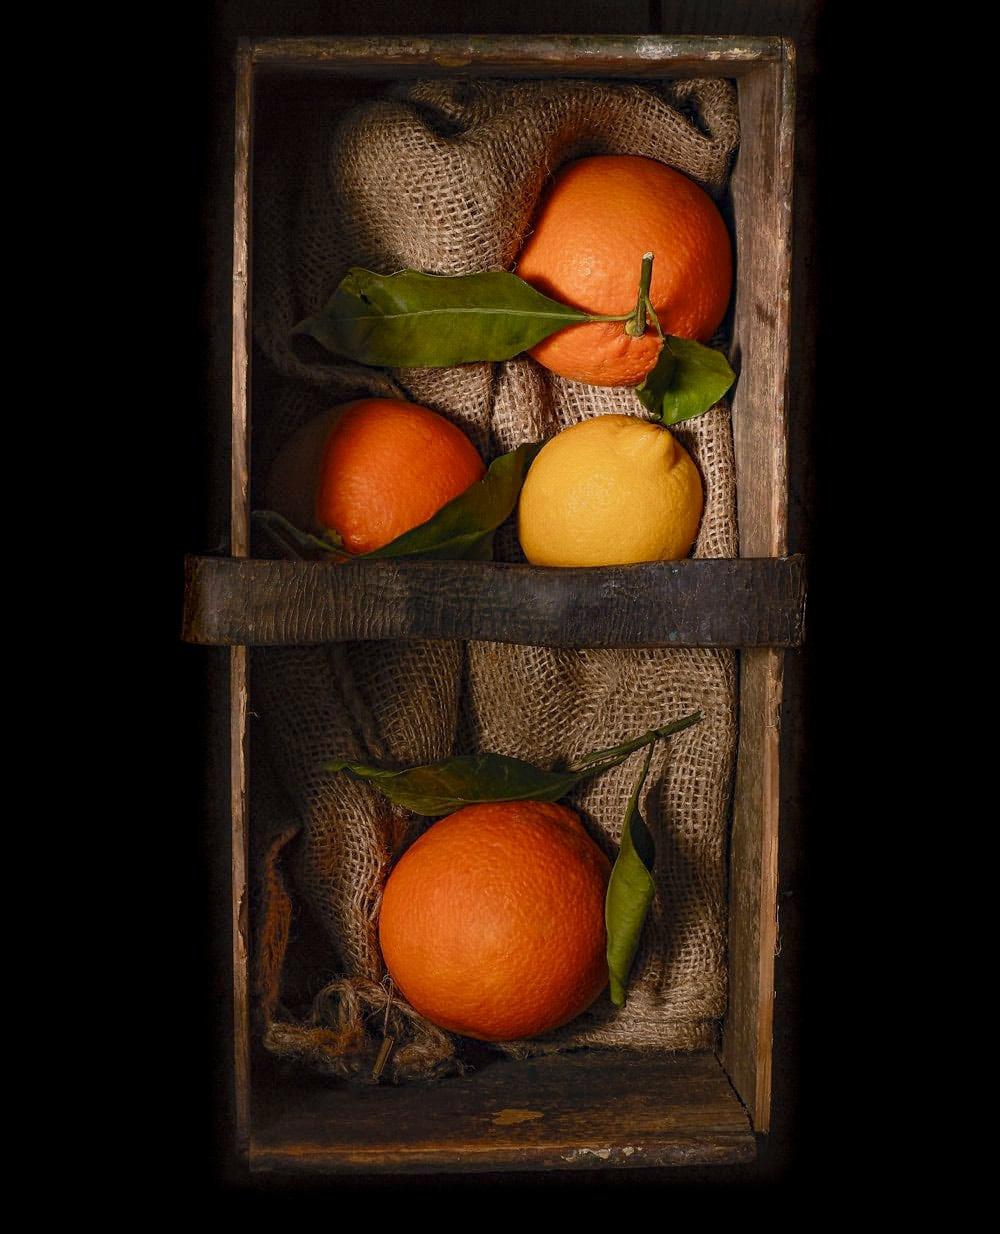 Citrus Fruits in an Old Wooden Box